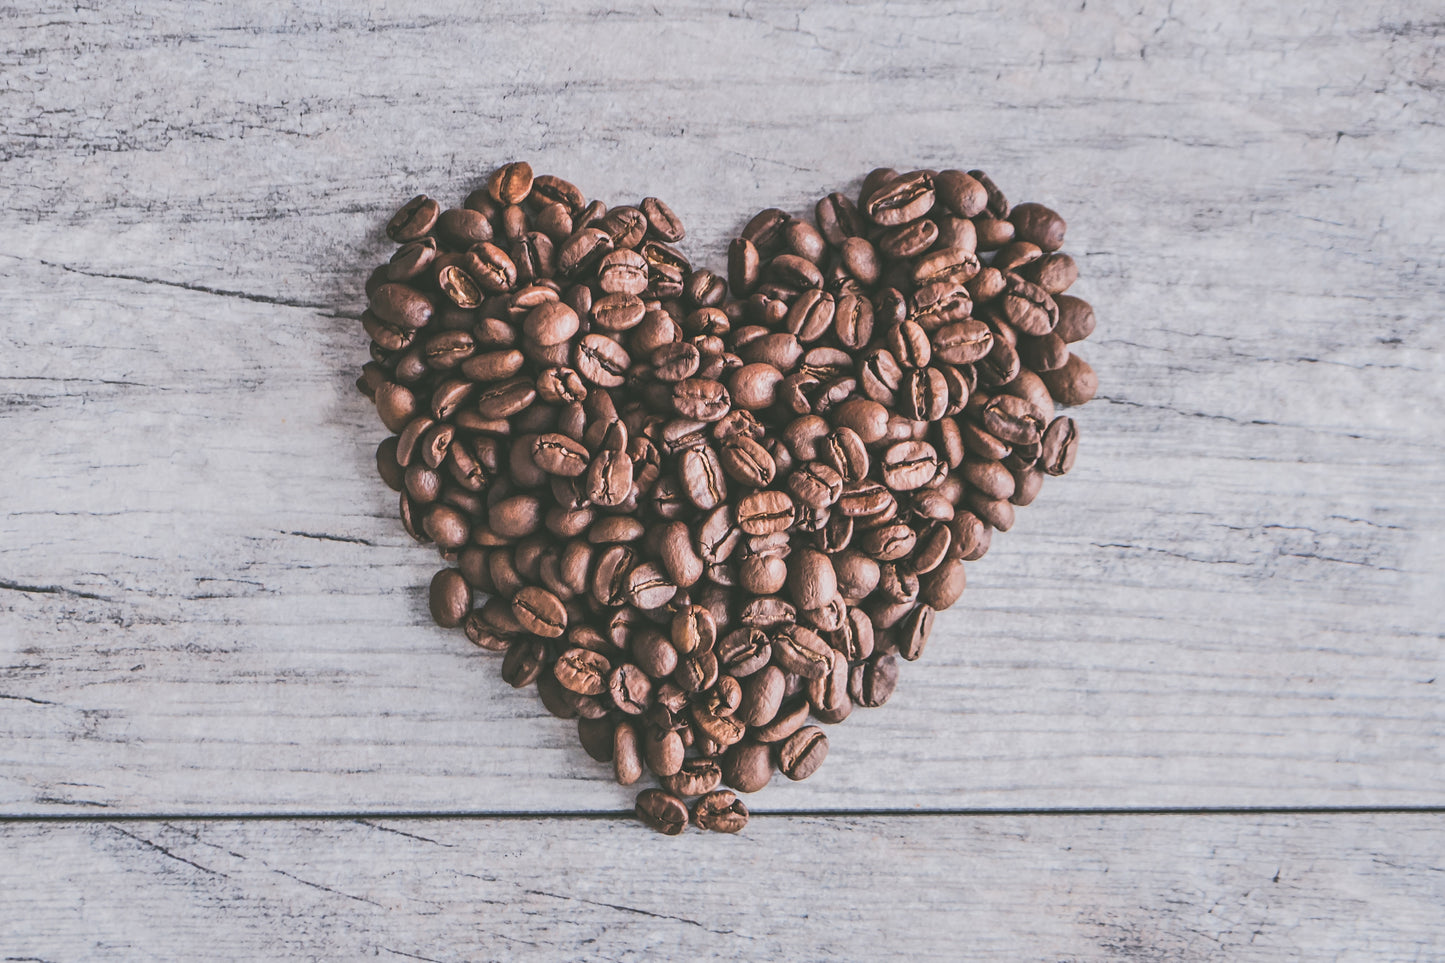 Coffee Myths and Facts: 5 Myths About Coffee Answered